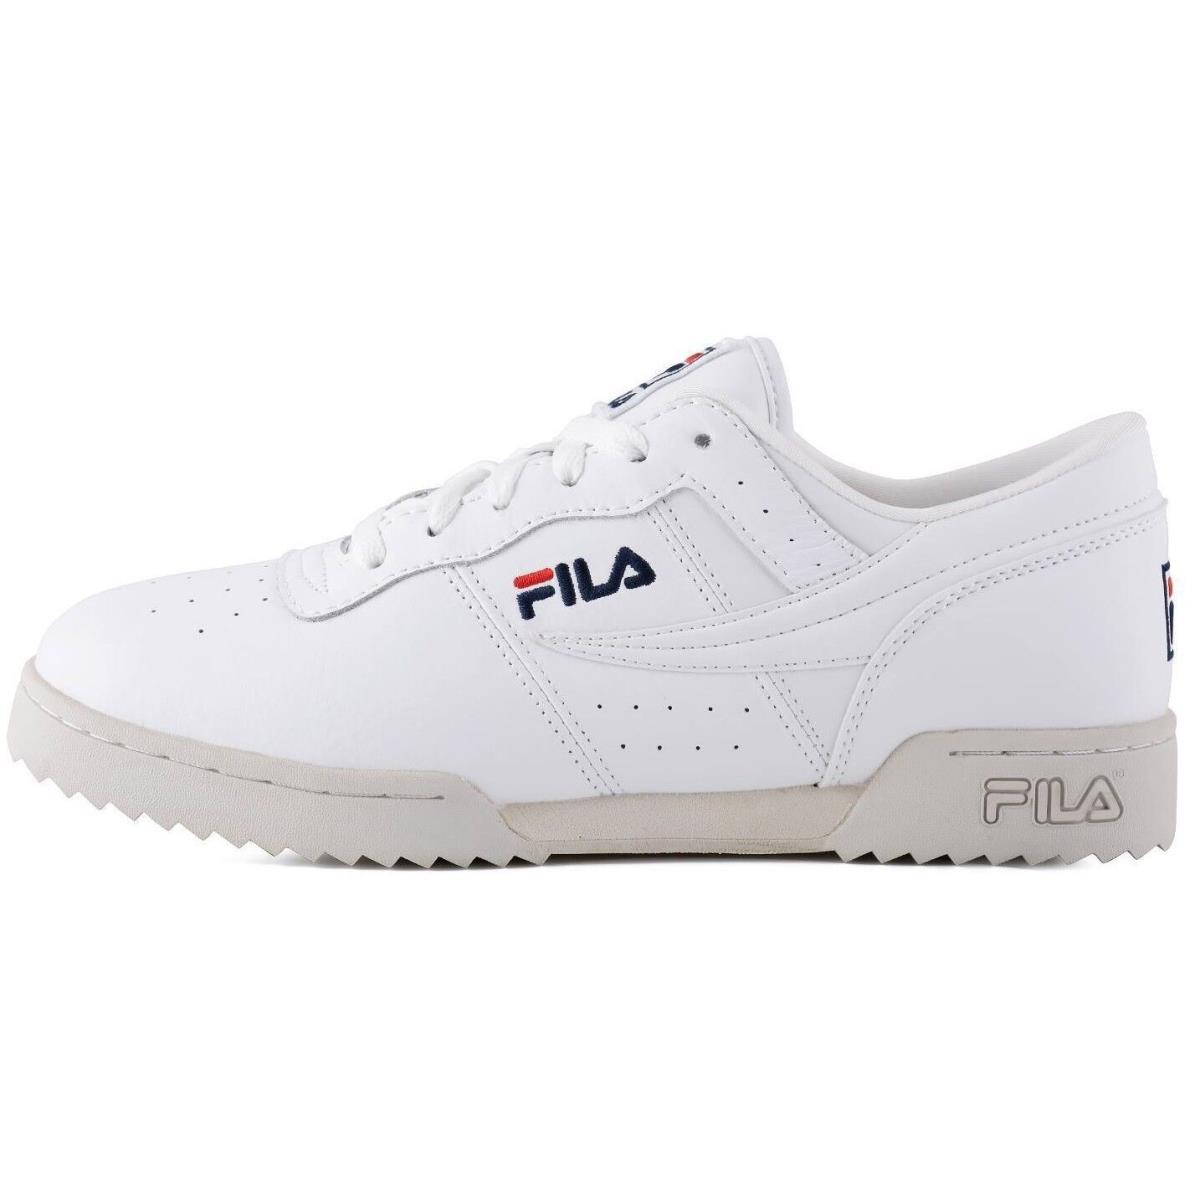 Fila Original Fitness Fitness Ripple Low Top Shoes 1FN0068-109